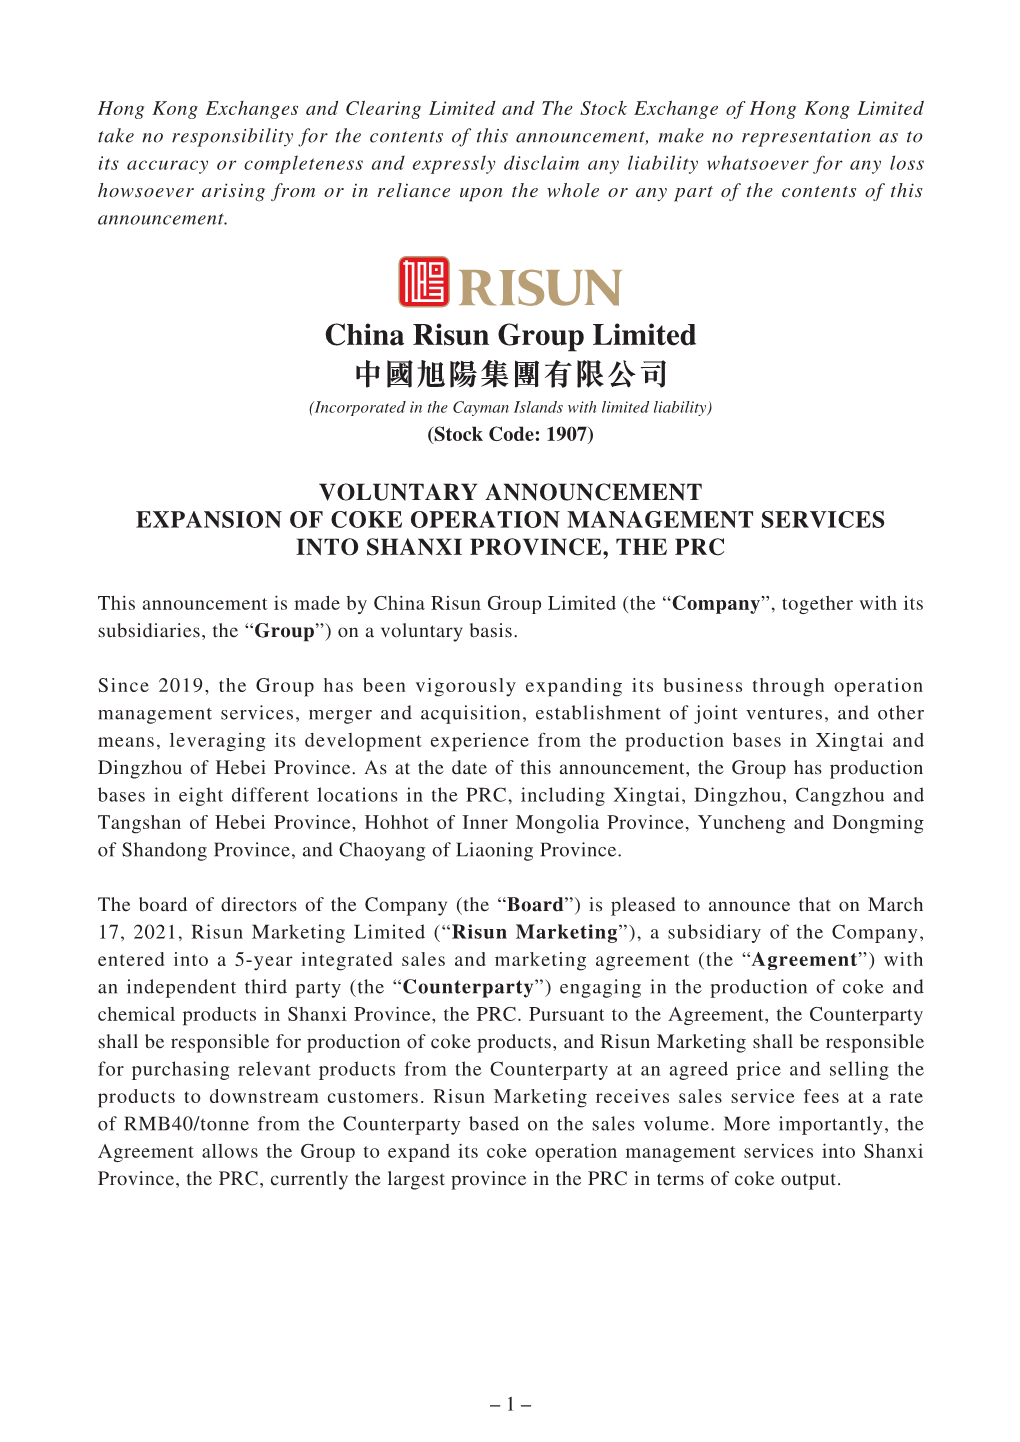 China Risun Group Limited 中國旭陽集團有限公司 (Incorporated in the Cayman Islands with Limited Liability) (Stock Code: 1907)